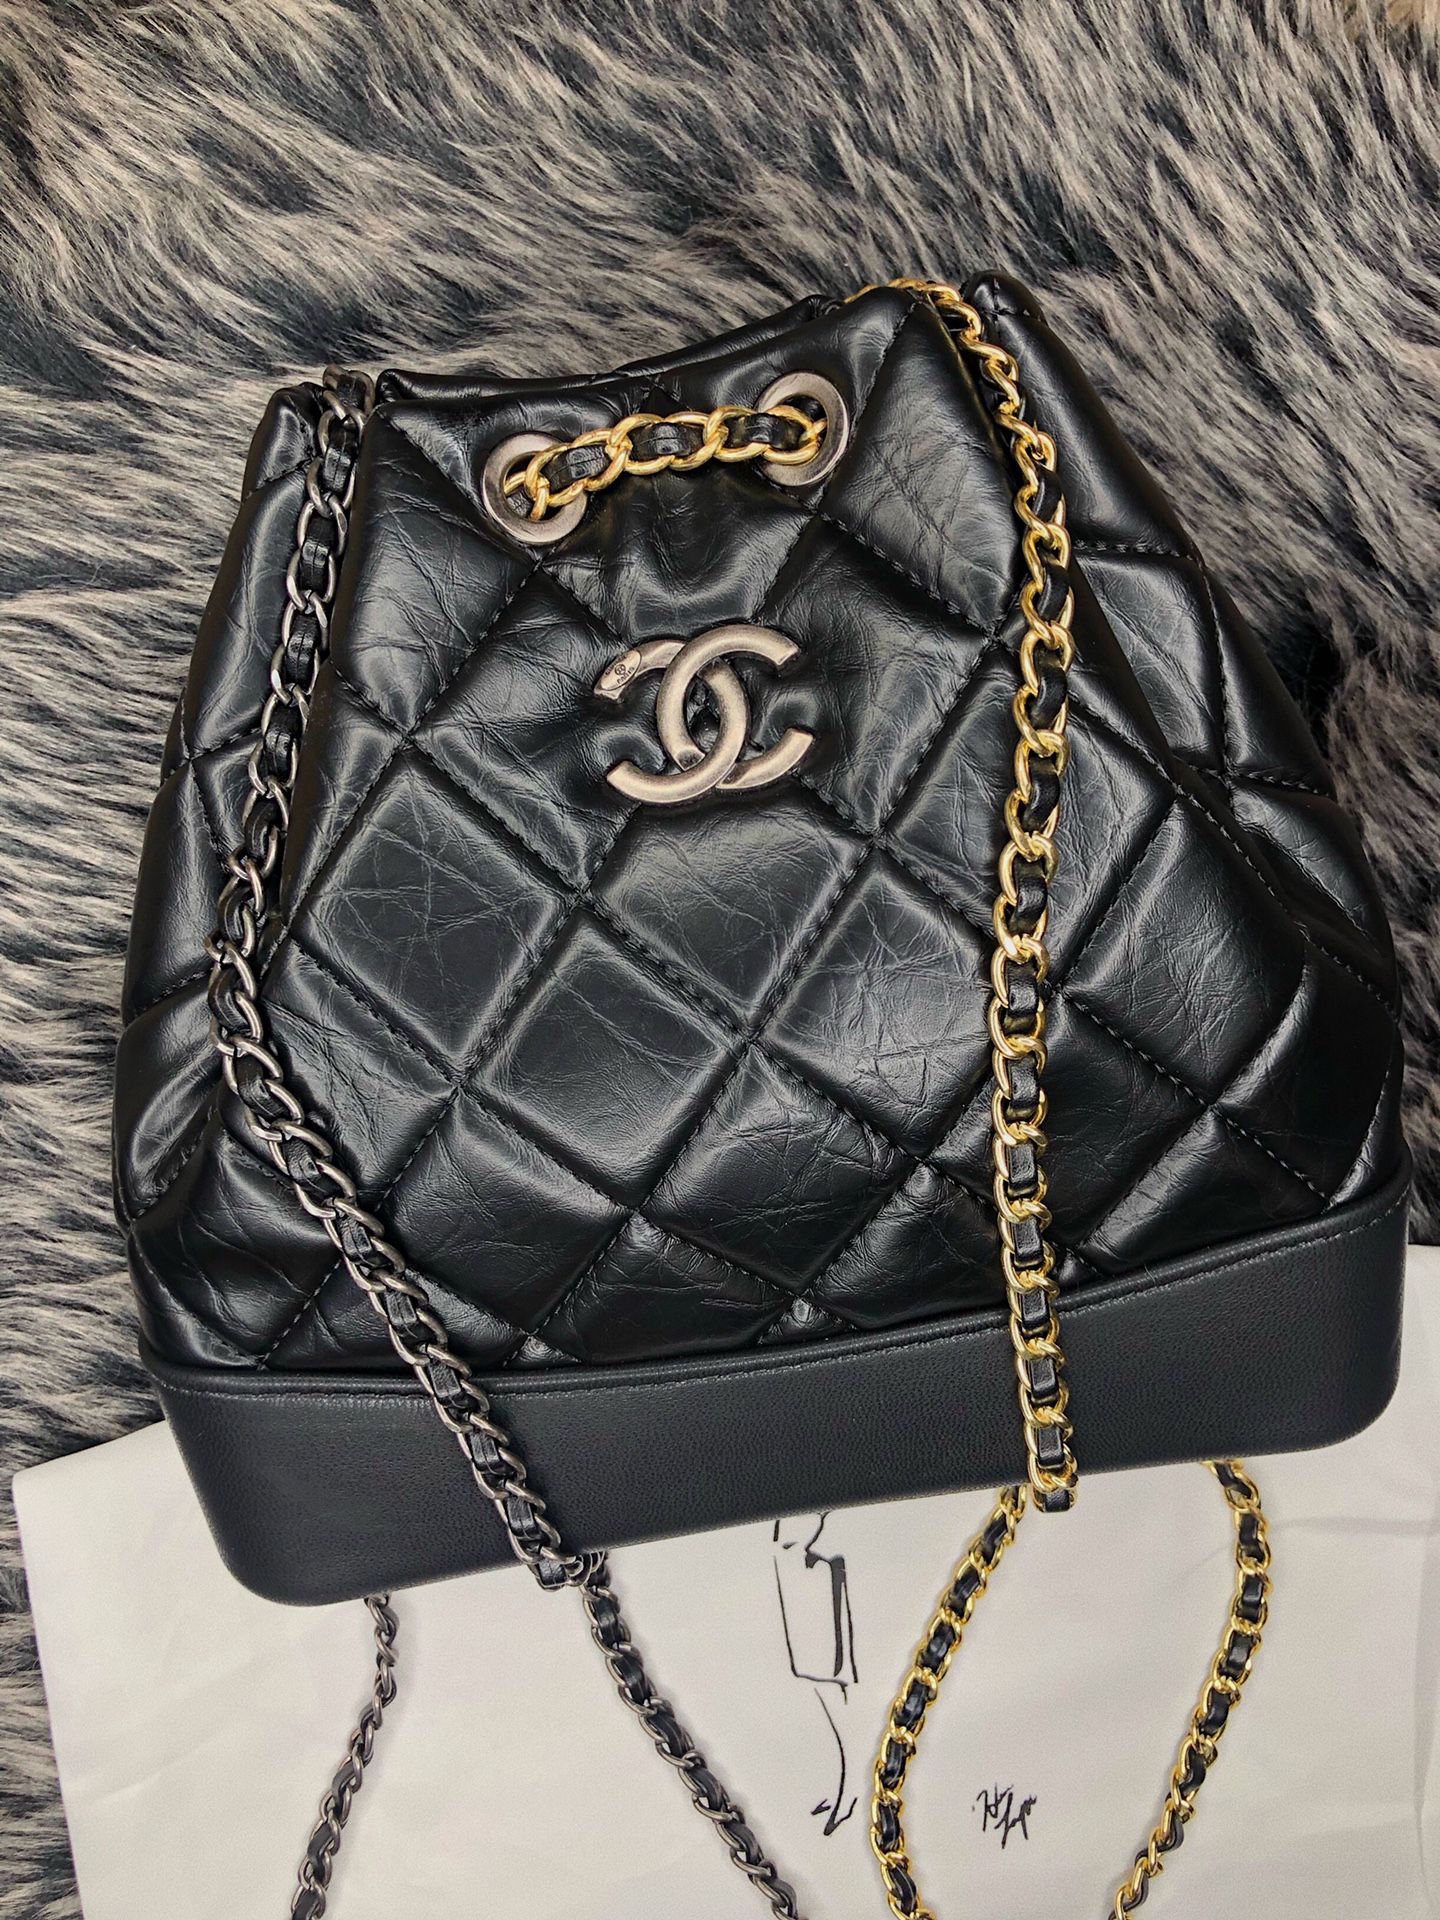 chanel gabrielle backpack black for Sale in Fresno, CA - OfferUp